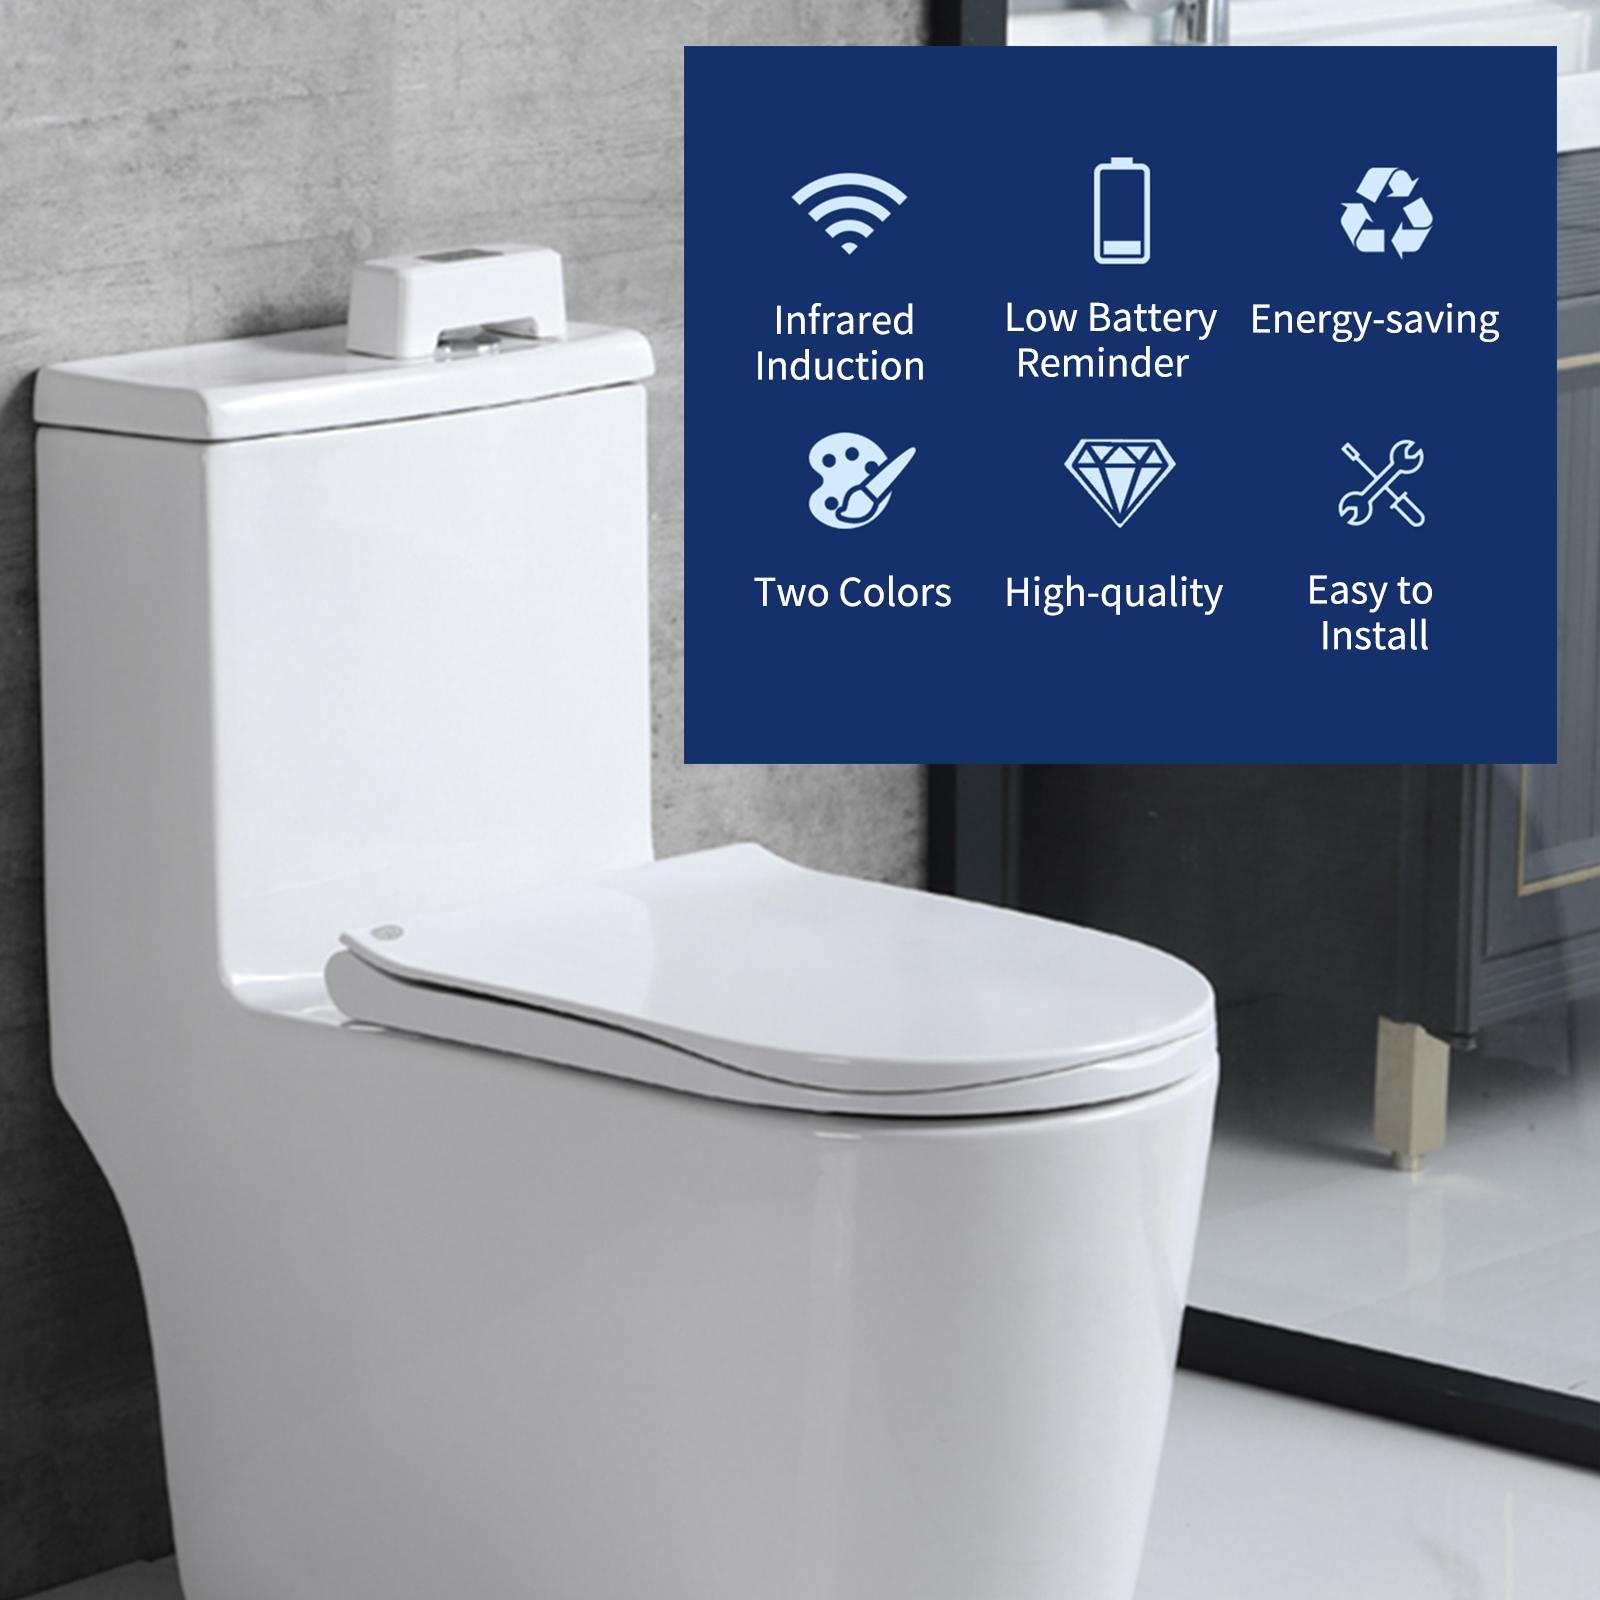 The smart toilet sensor works by passing the hand